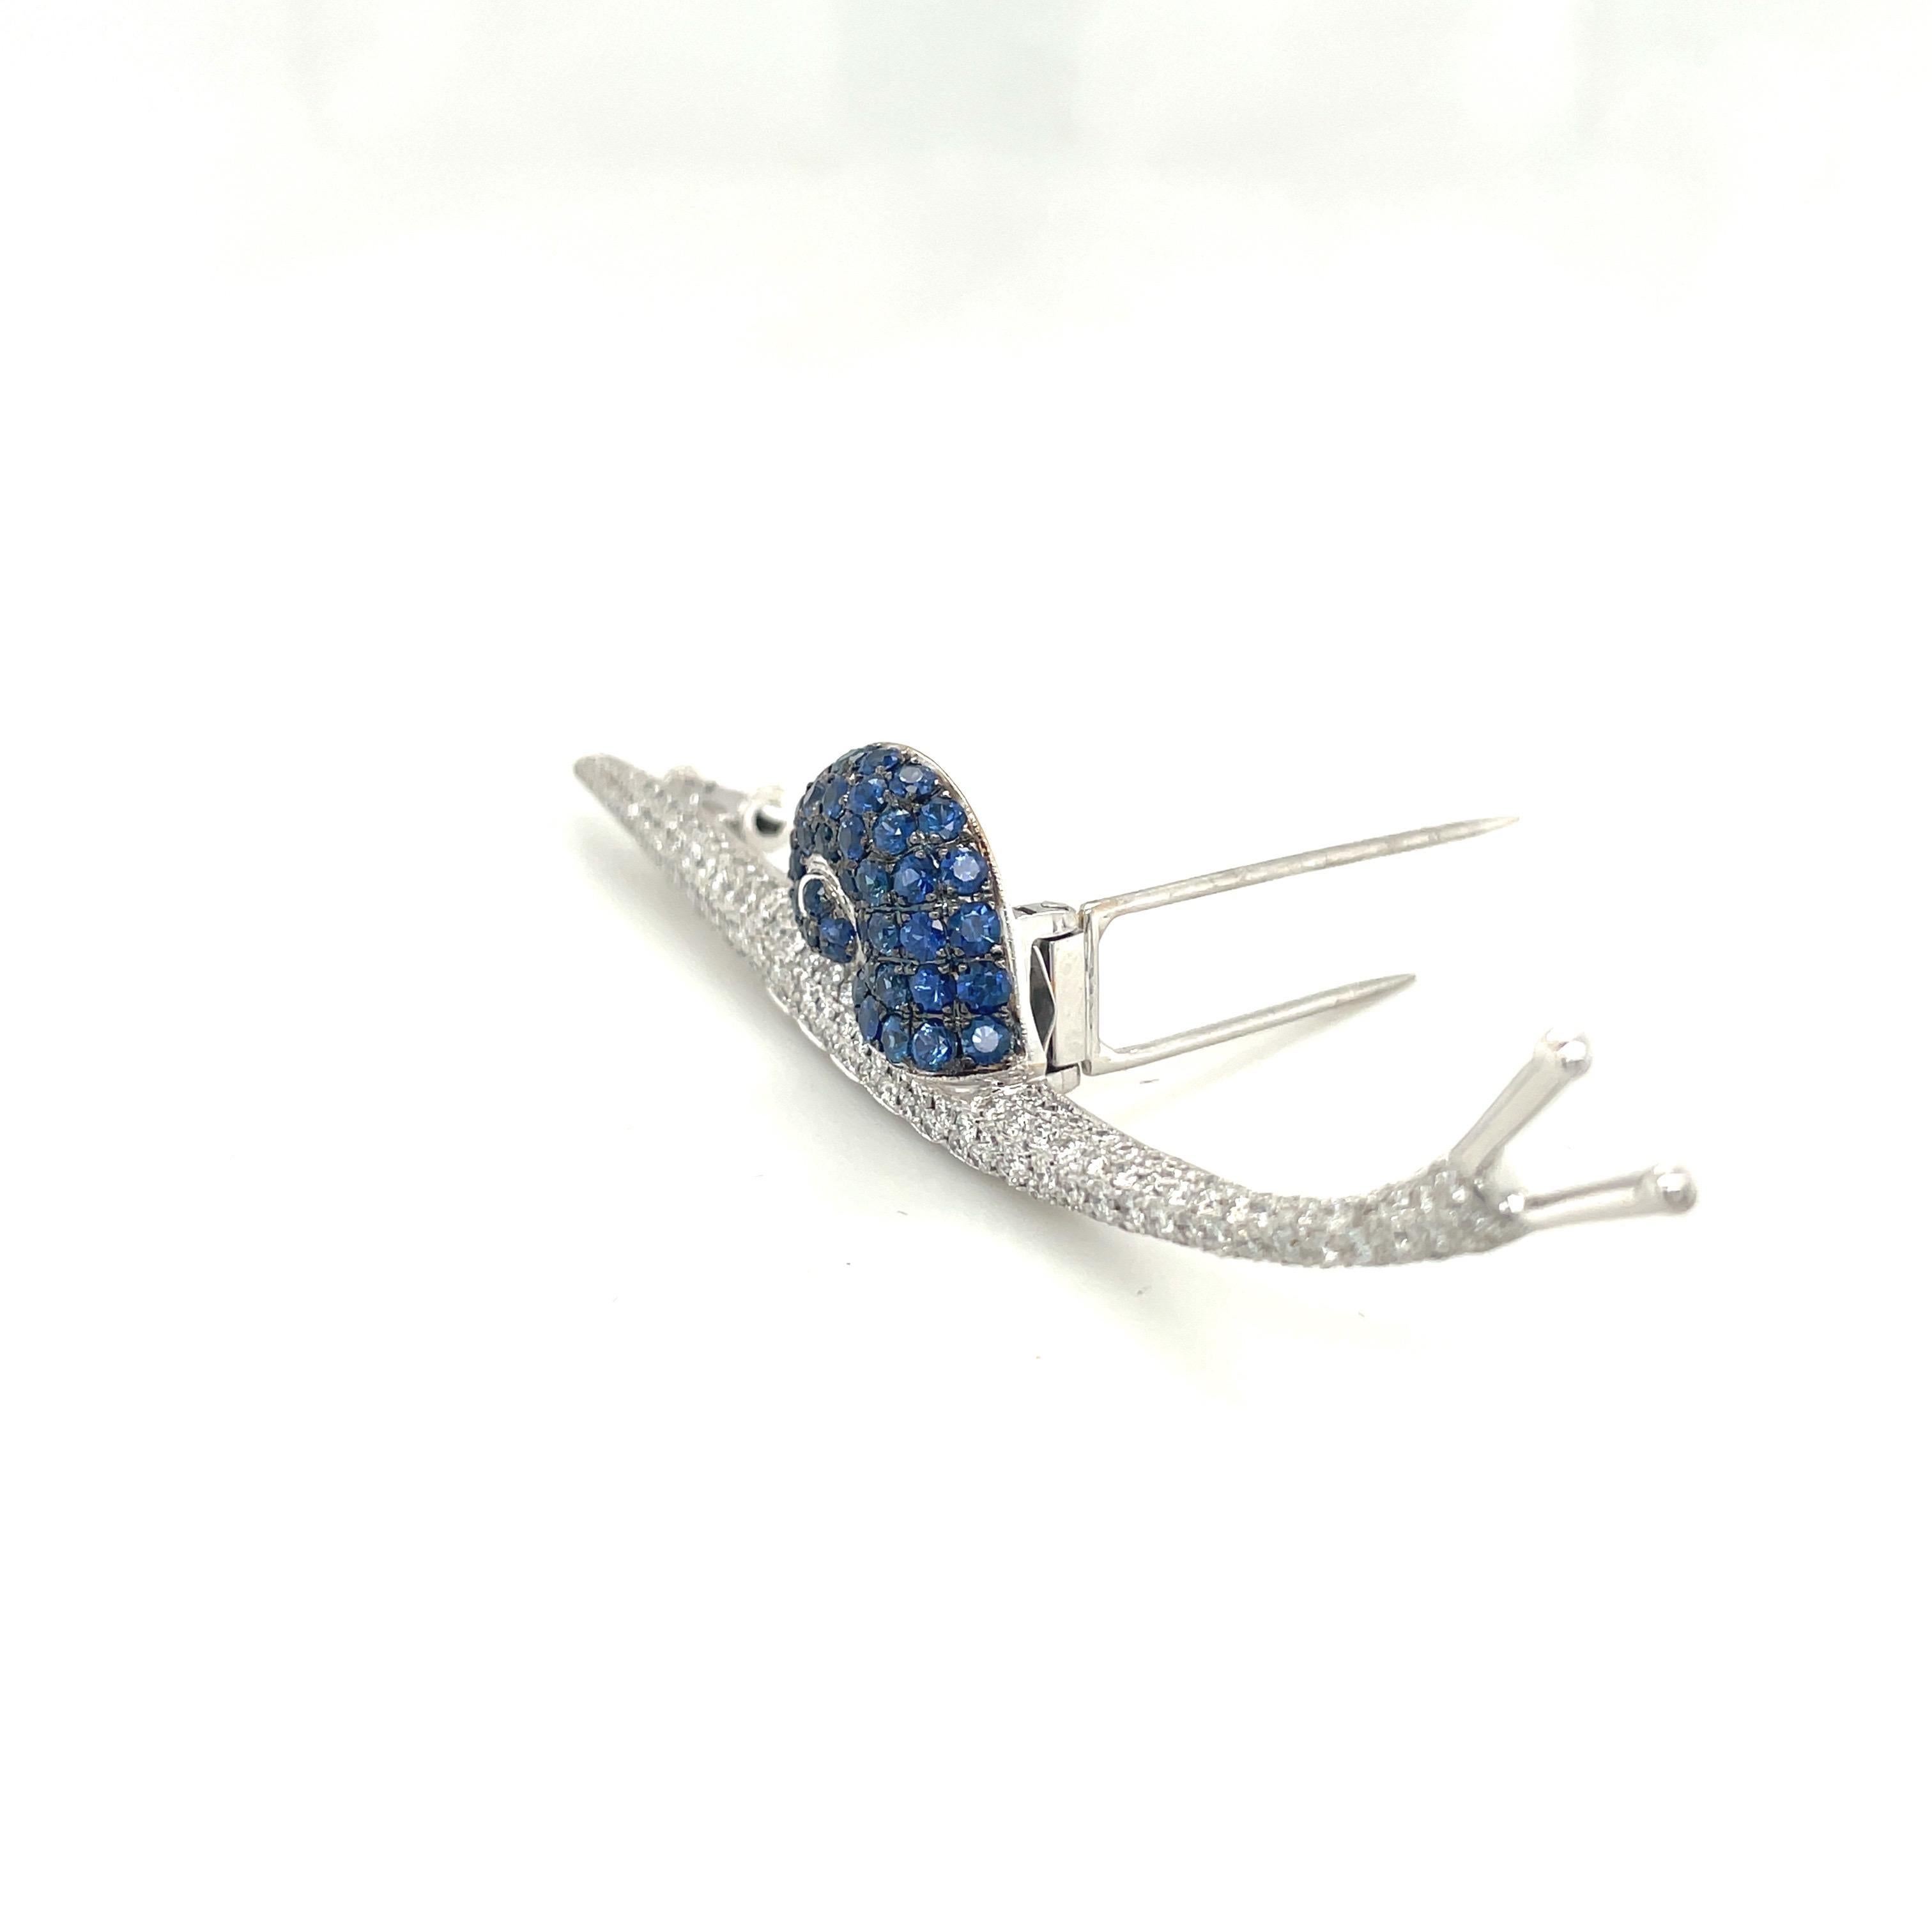 Cellini Jewelers NYC, Lovely snail brooch ,artistically designed in 18 karat white gold. The body is set with 1.80 carats of round brilliant diamonds, and the shell is set with 2.50 carats of round blue sapphires. The snail is 3.25